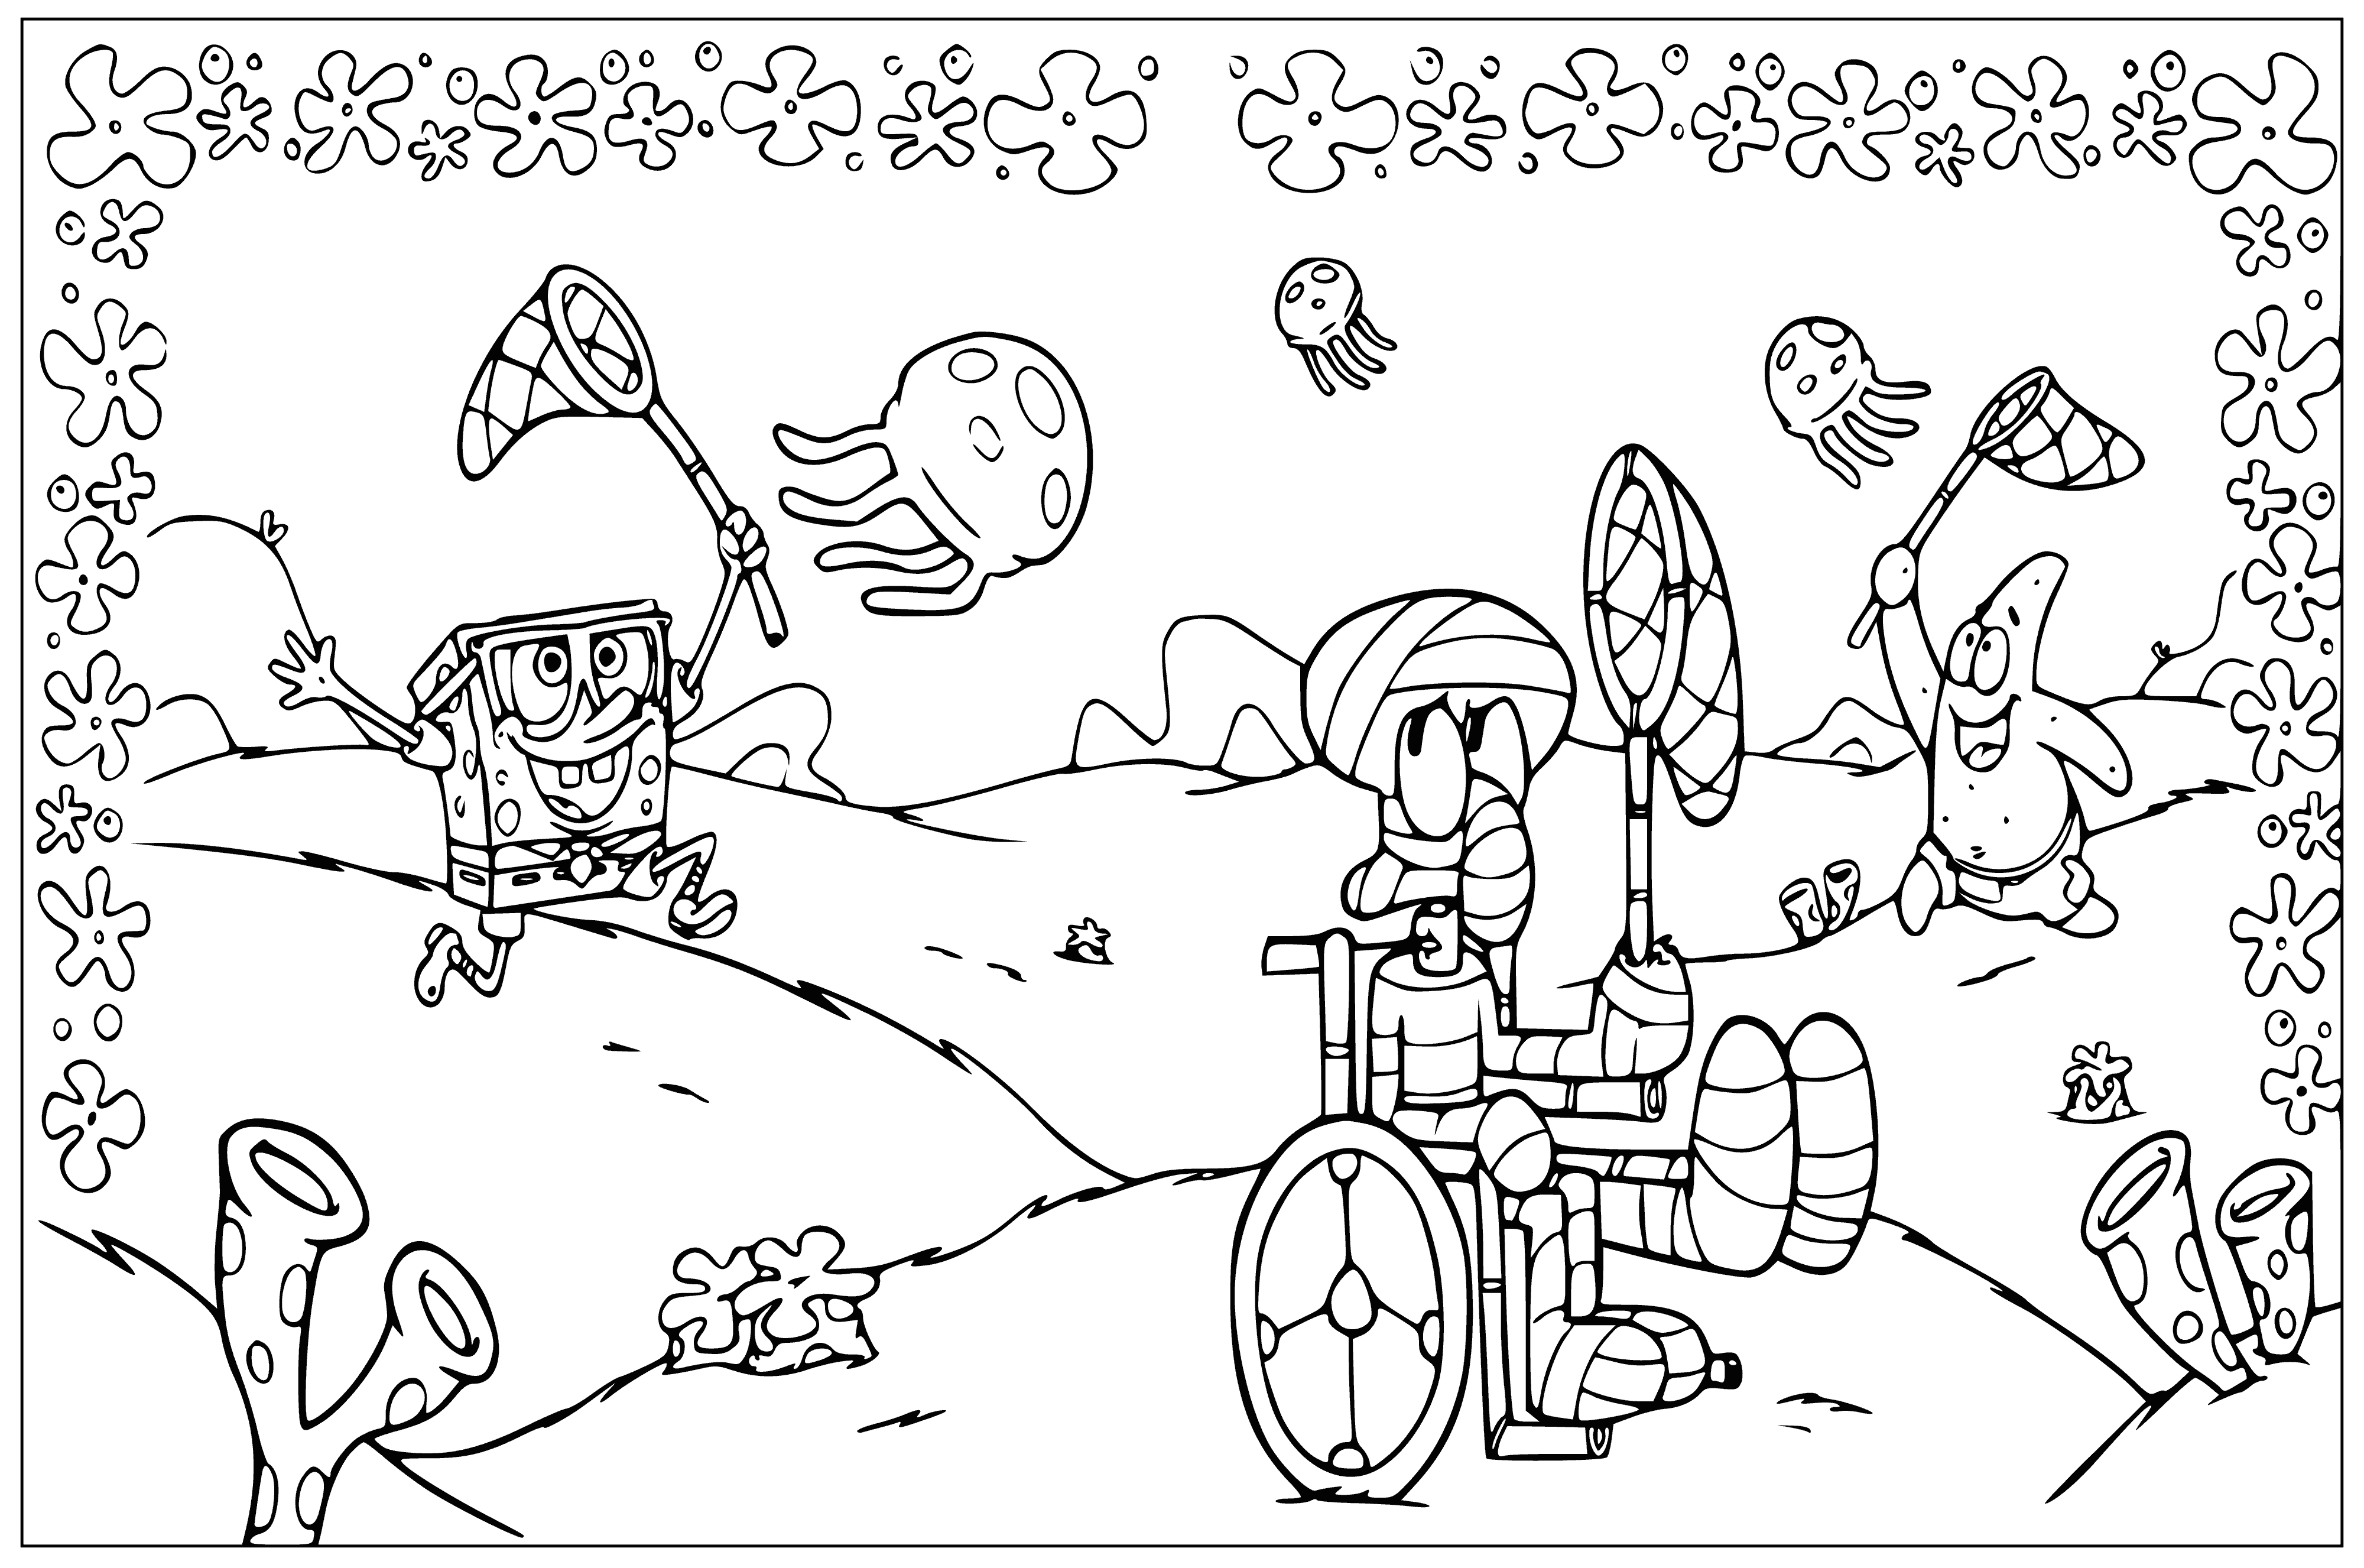 Everyone is catching jellyfish coloring page